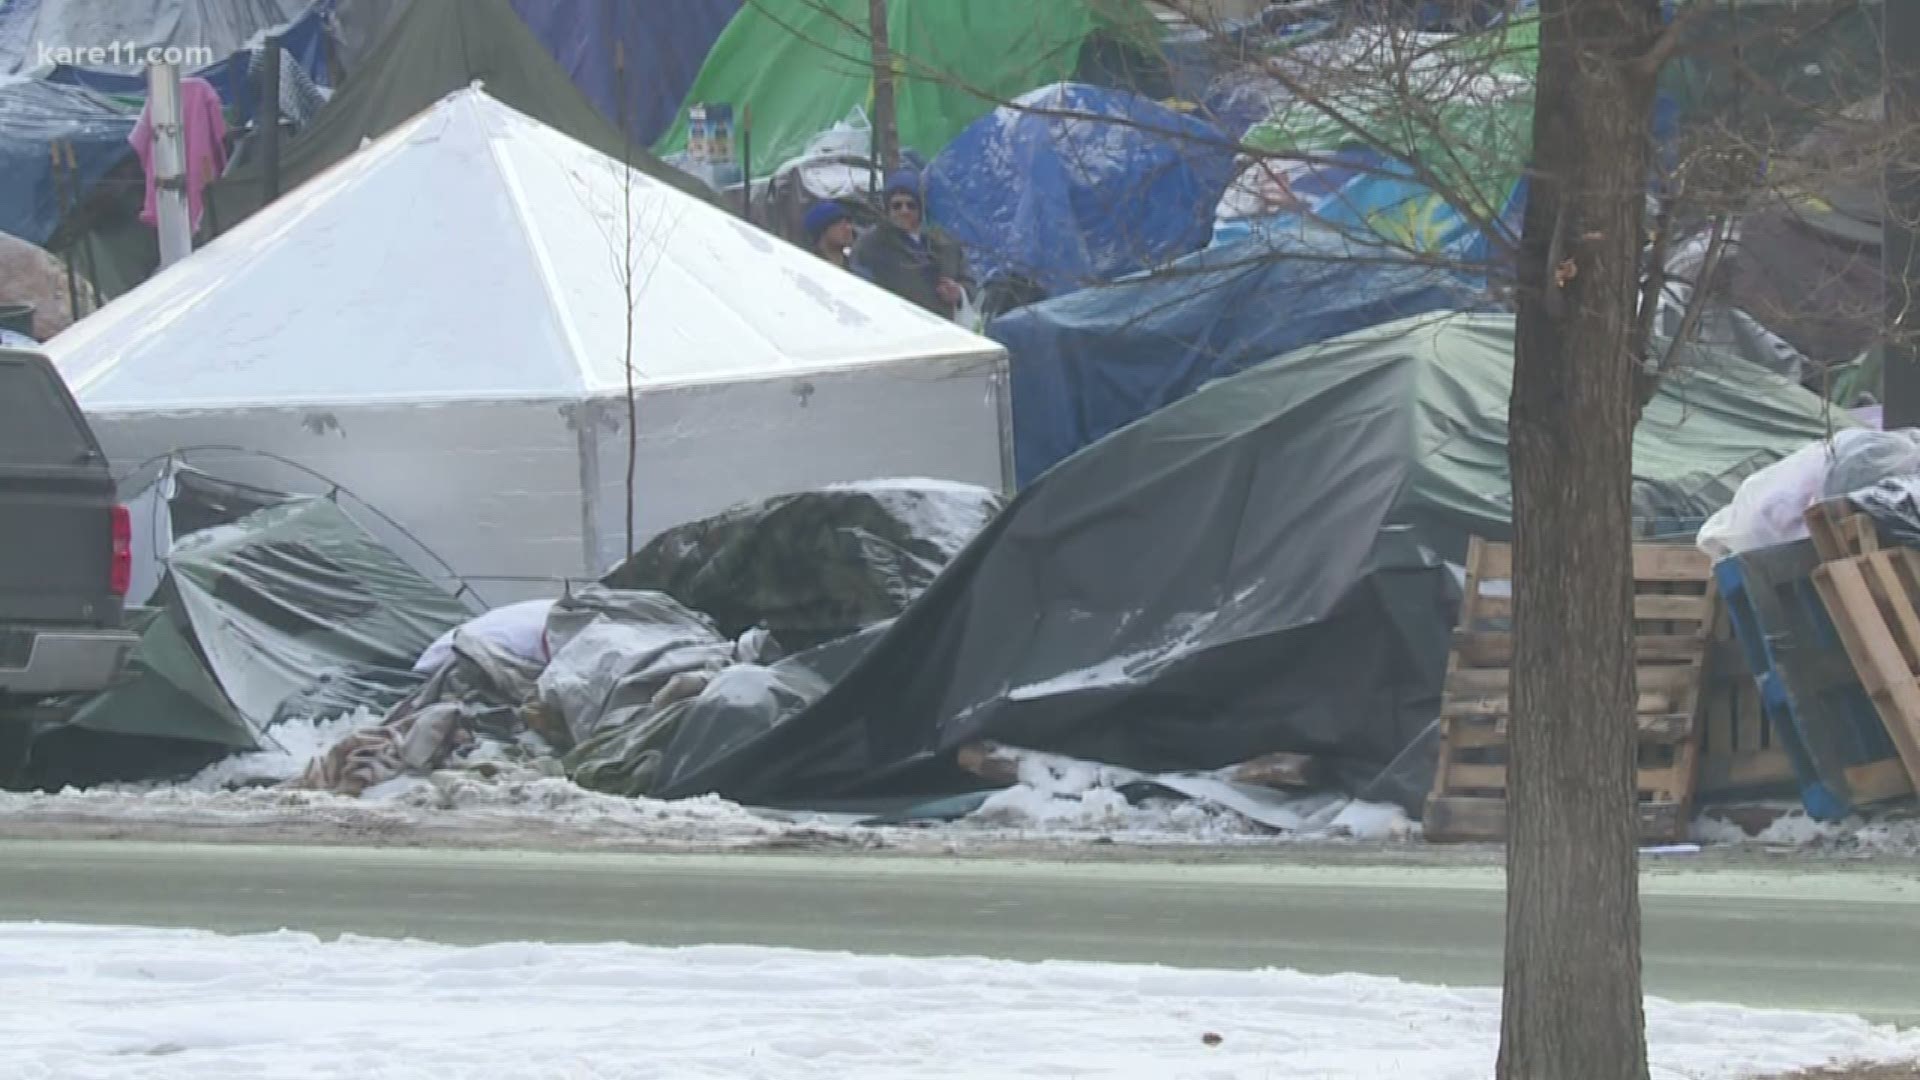 With trespassing and burglaries rising this year, Police contracted with a homeless outreach center to help.